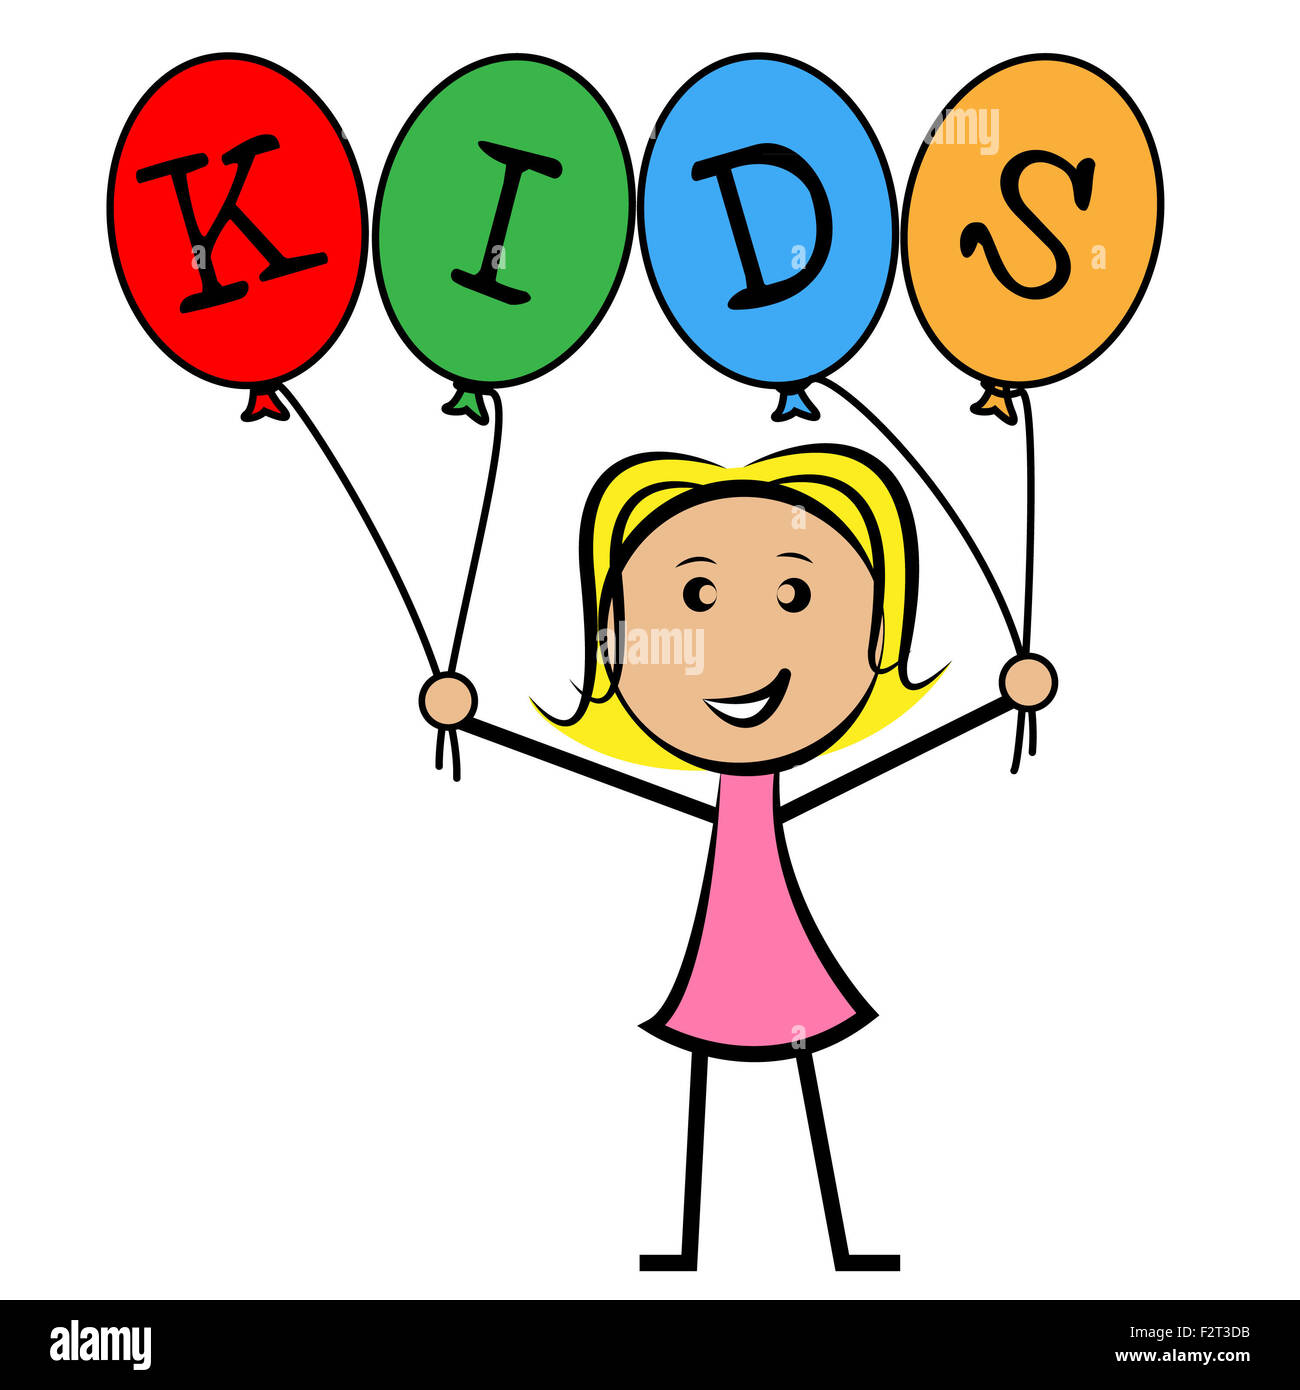 Kids Balloons Indicating Young Woman And Child Stock Photo